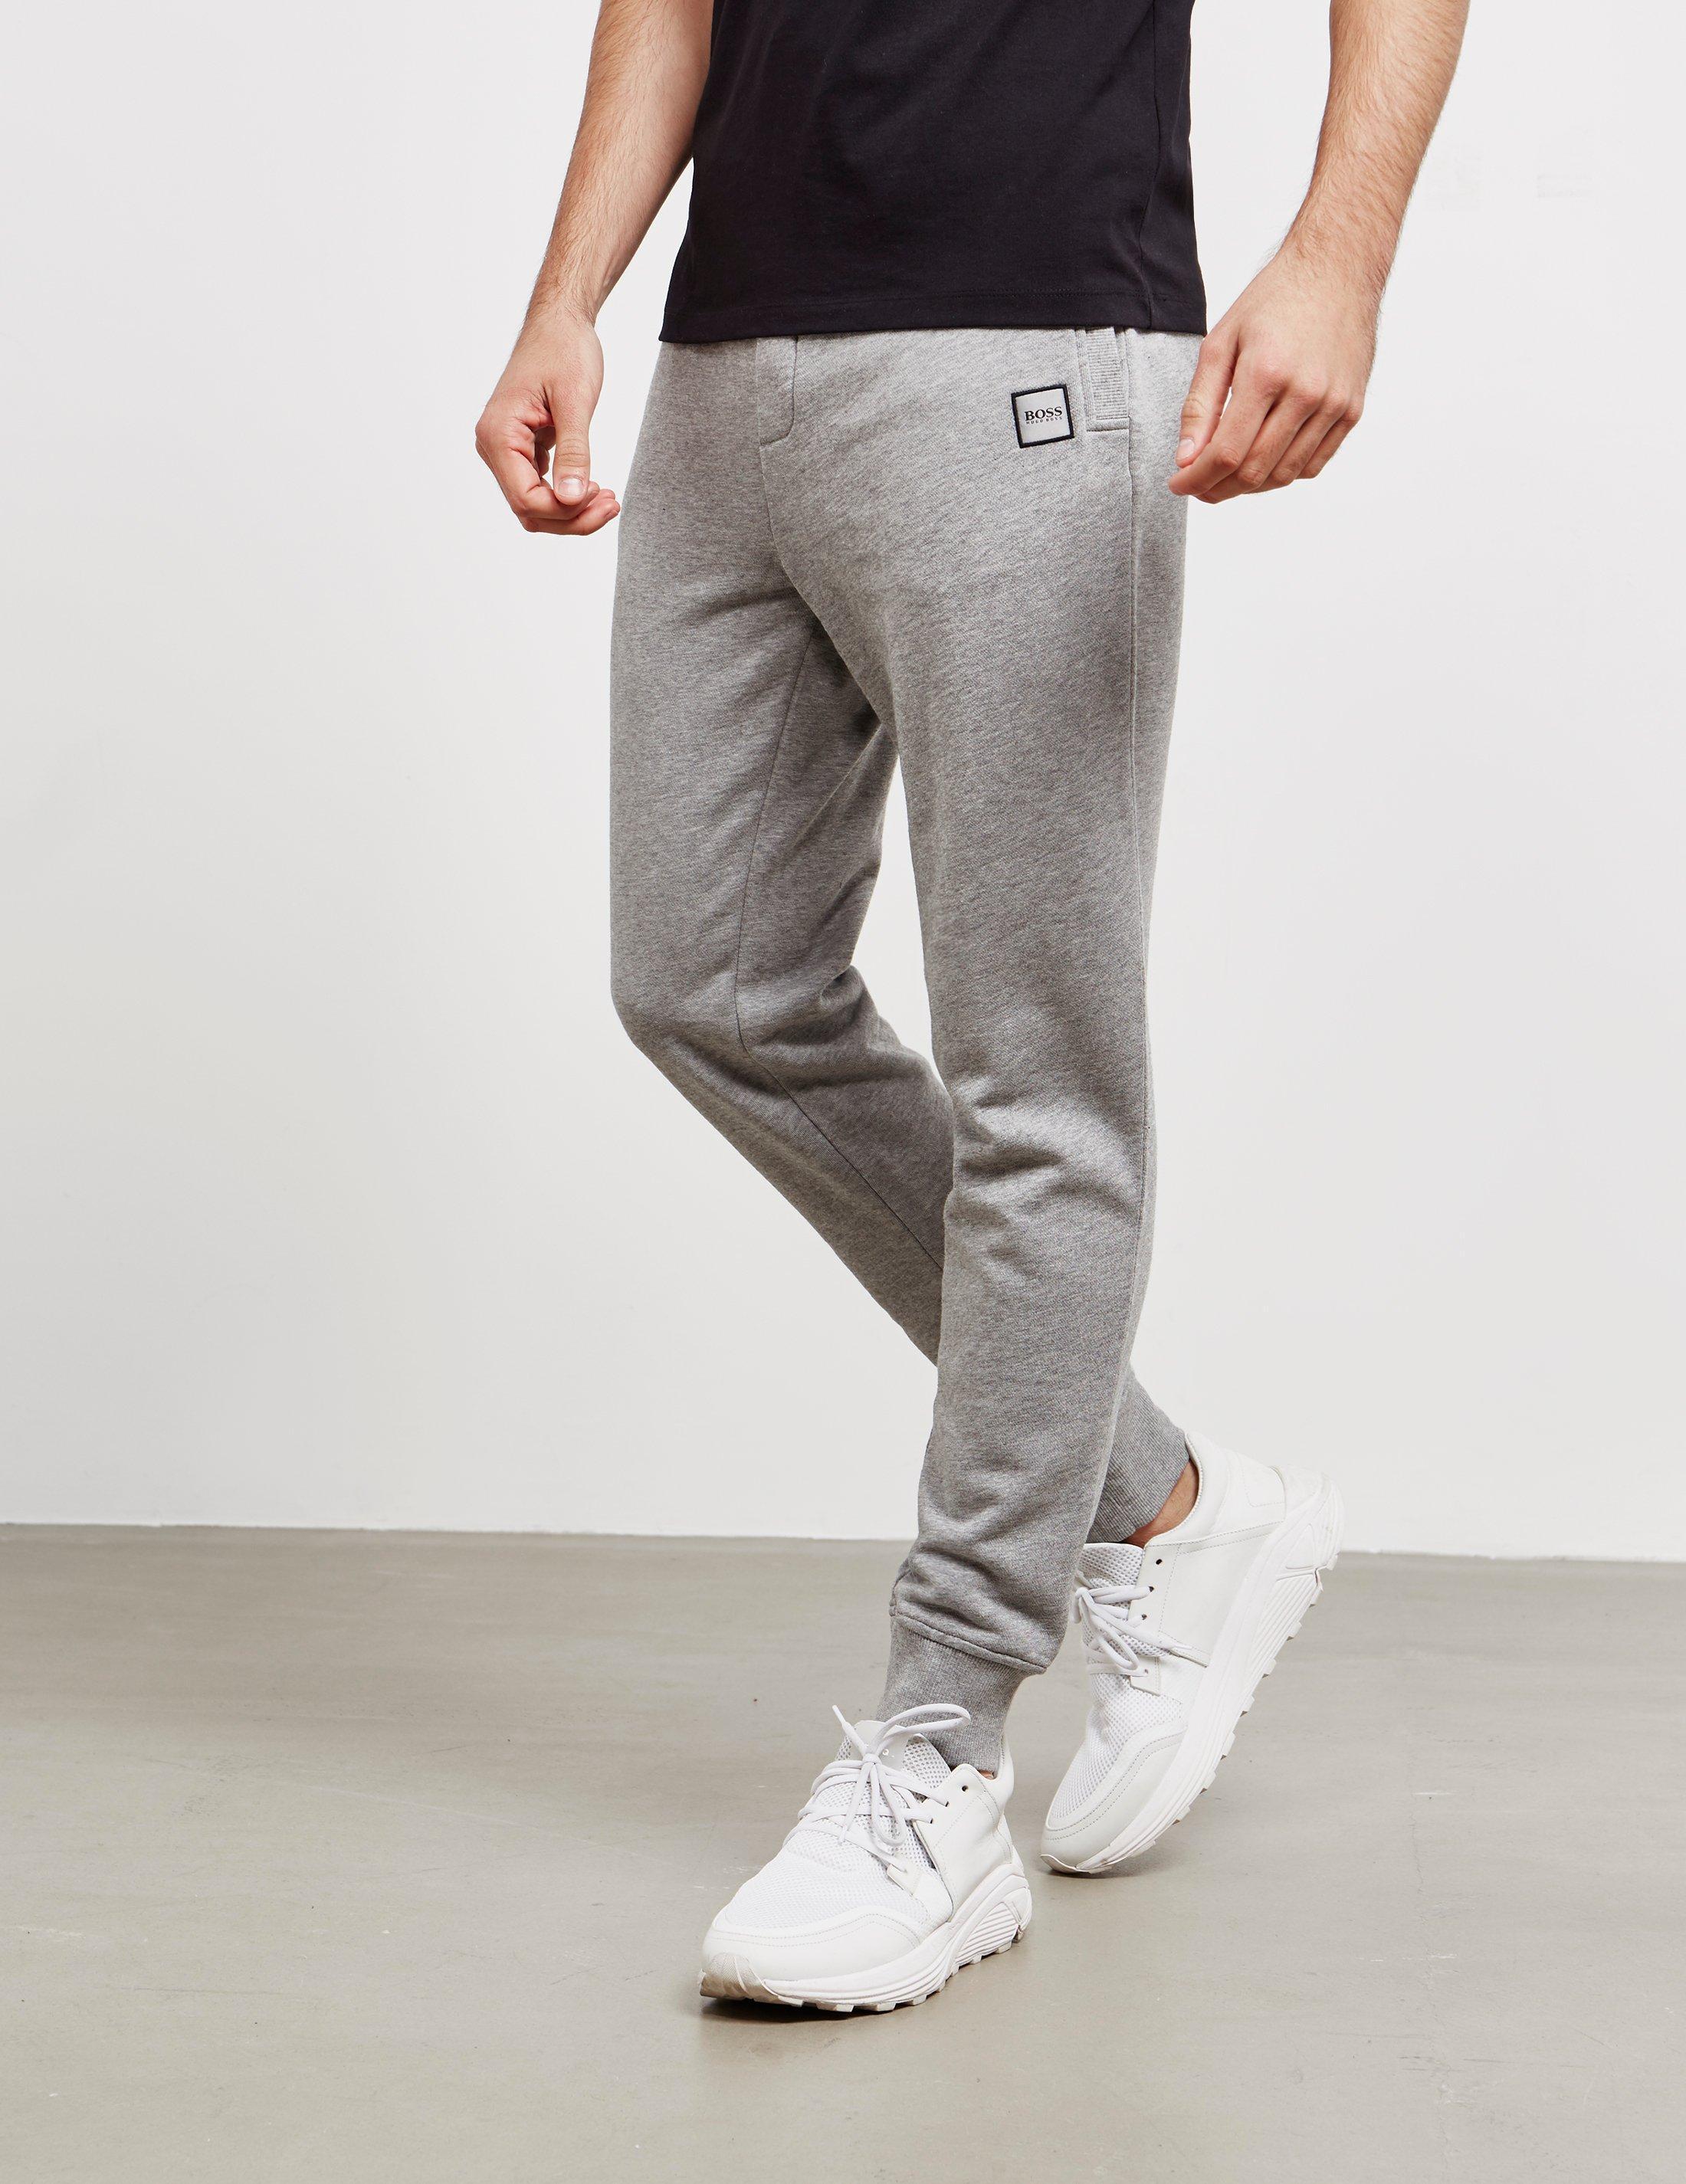 boss striker cuffed track pants Cheaper Than Retail Price> Buy Clothing,  Accessories and lifestyle products for women & men -